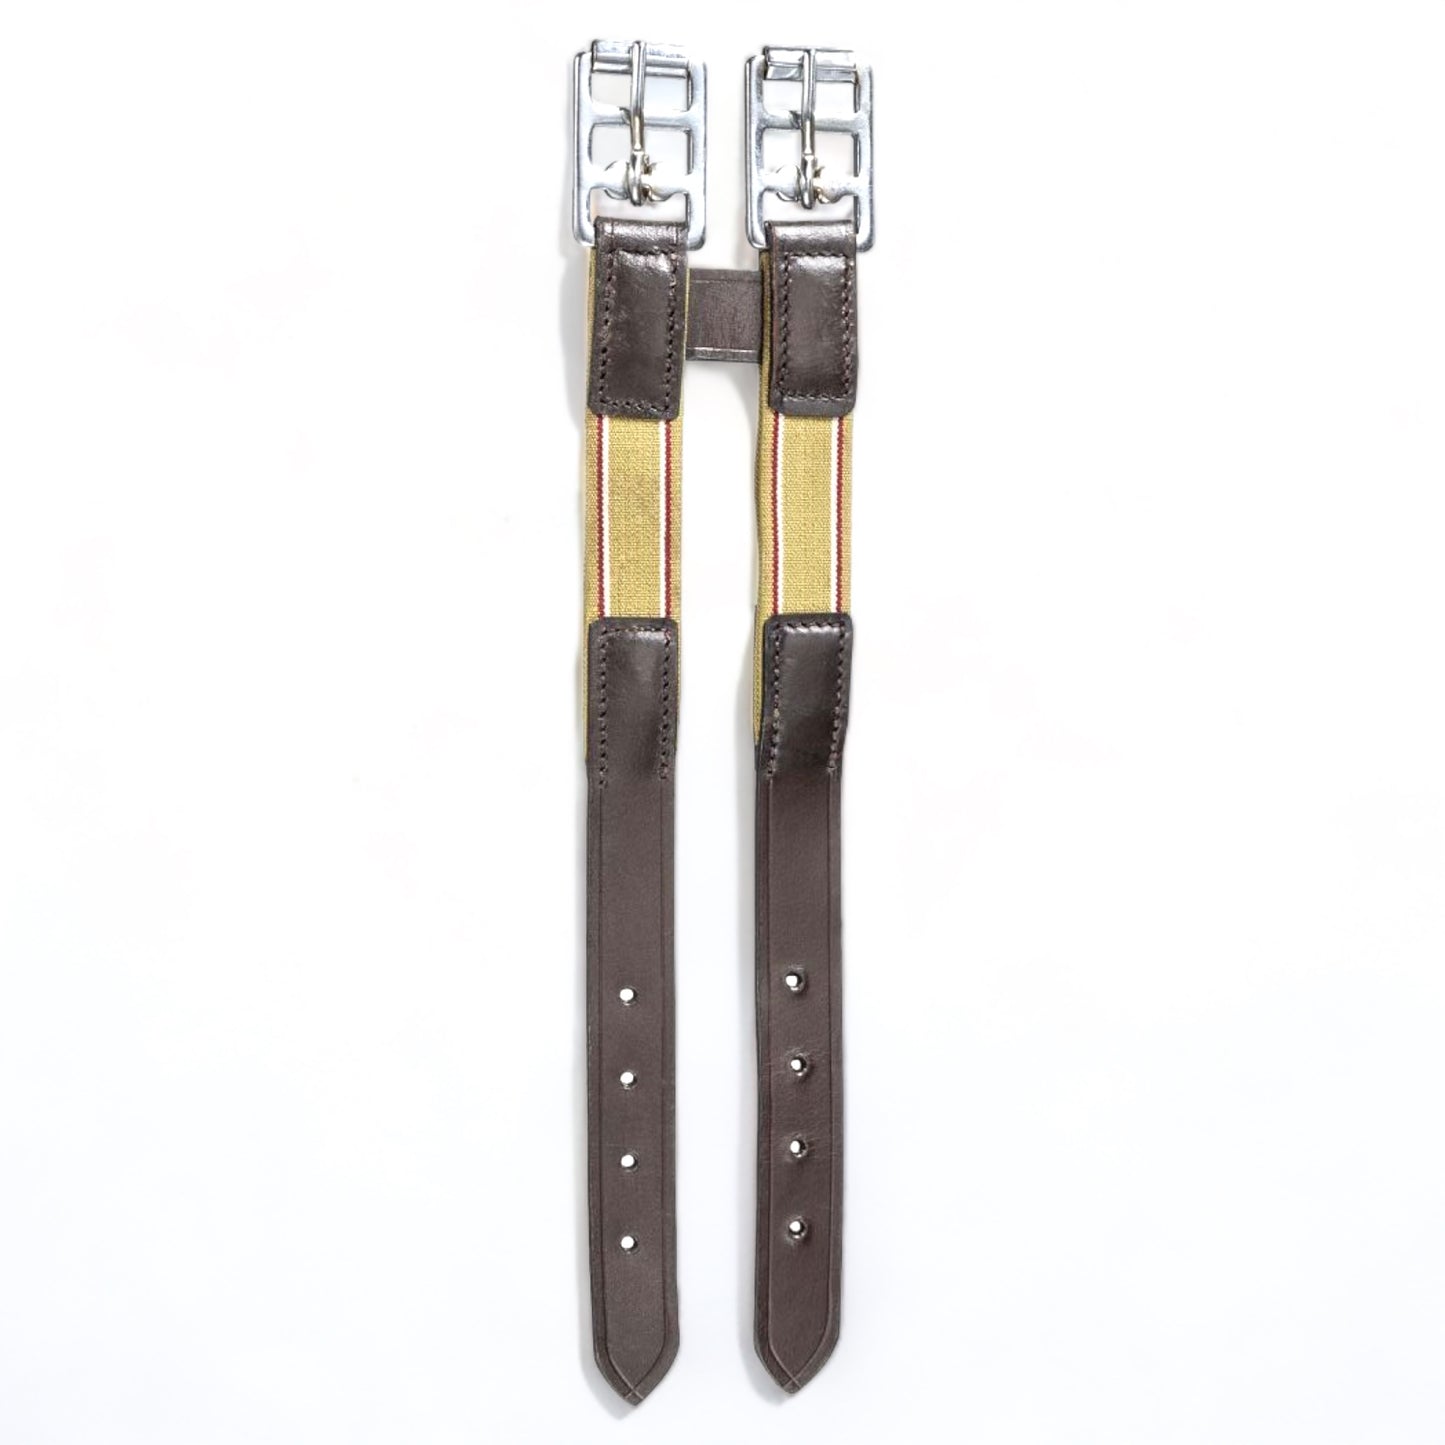 Leather Girth Extender With Elastic